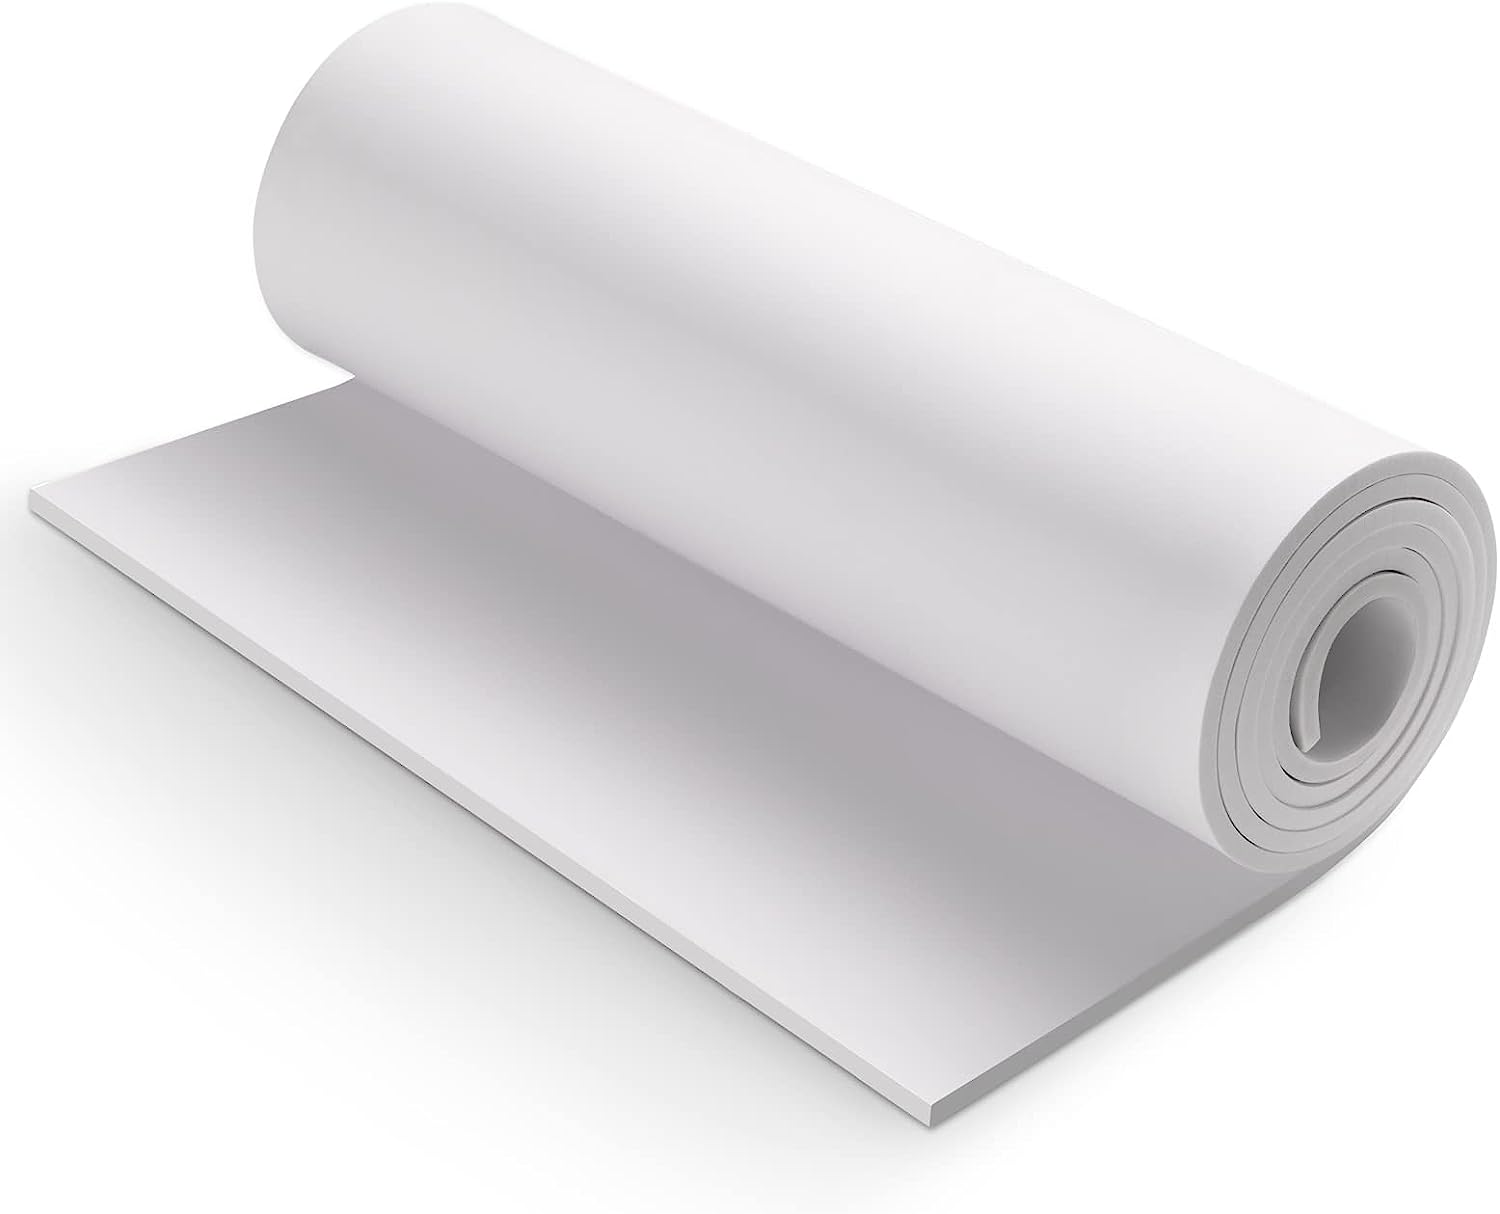 White Eva Foam Cosplay Sheets Roll Premium Eva Foam 5mm Thick 59"x13.9" High Density 86kg/m3 For Cosplay Costume Crafts DIY Projects By PAIDU